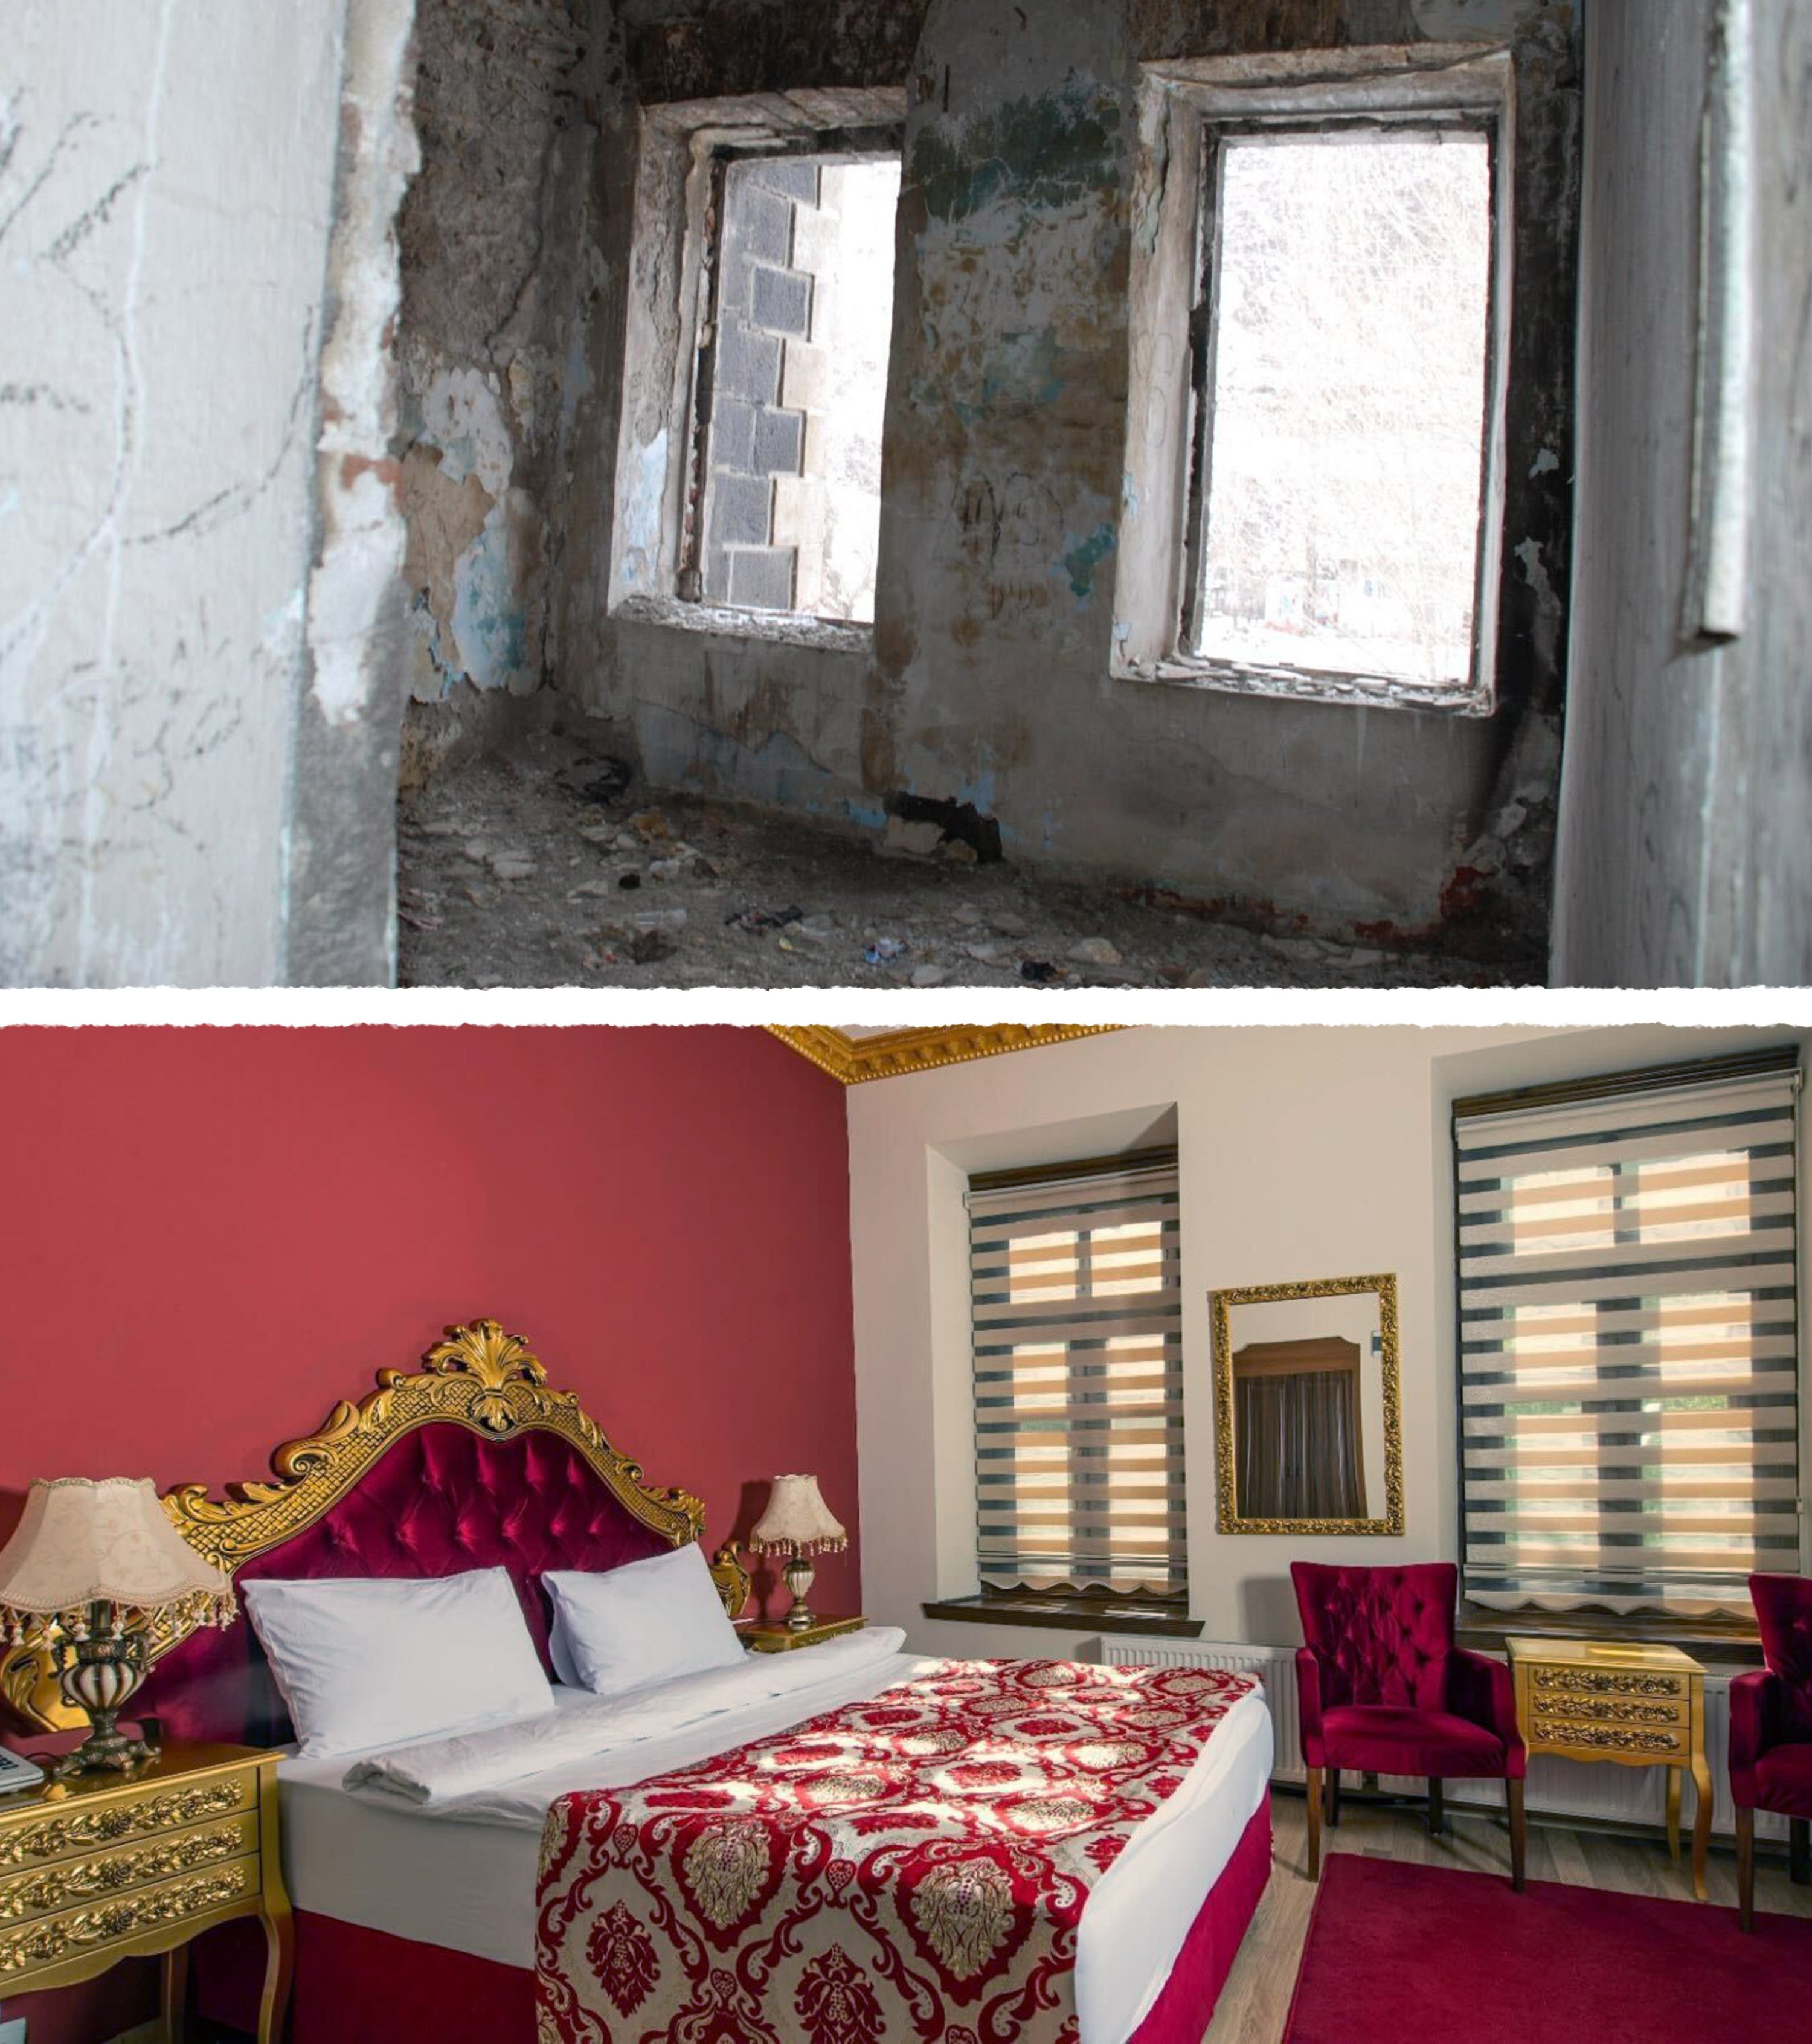 The views of the Katherina Palace before (up) and after restoration. (Asene Asanova for Daily Sabah)